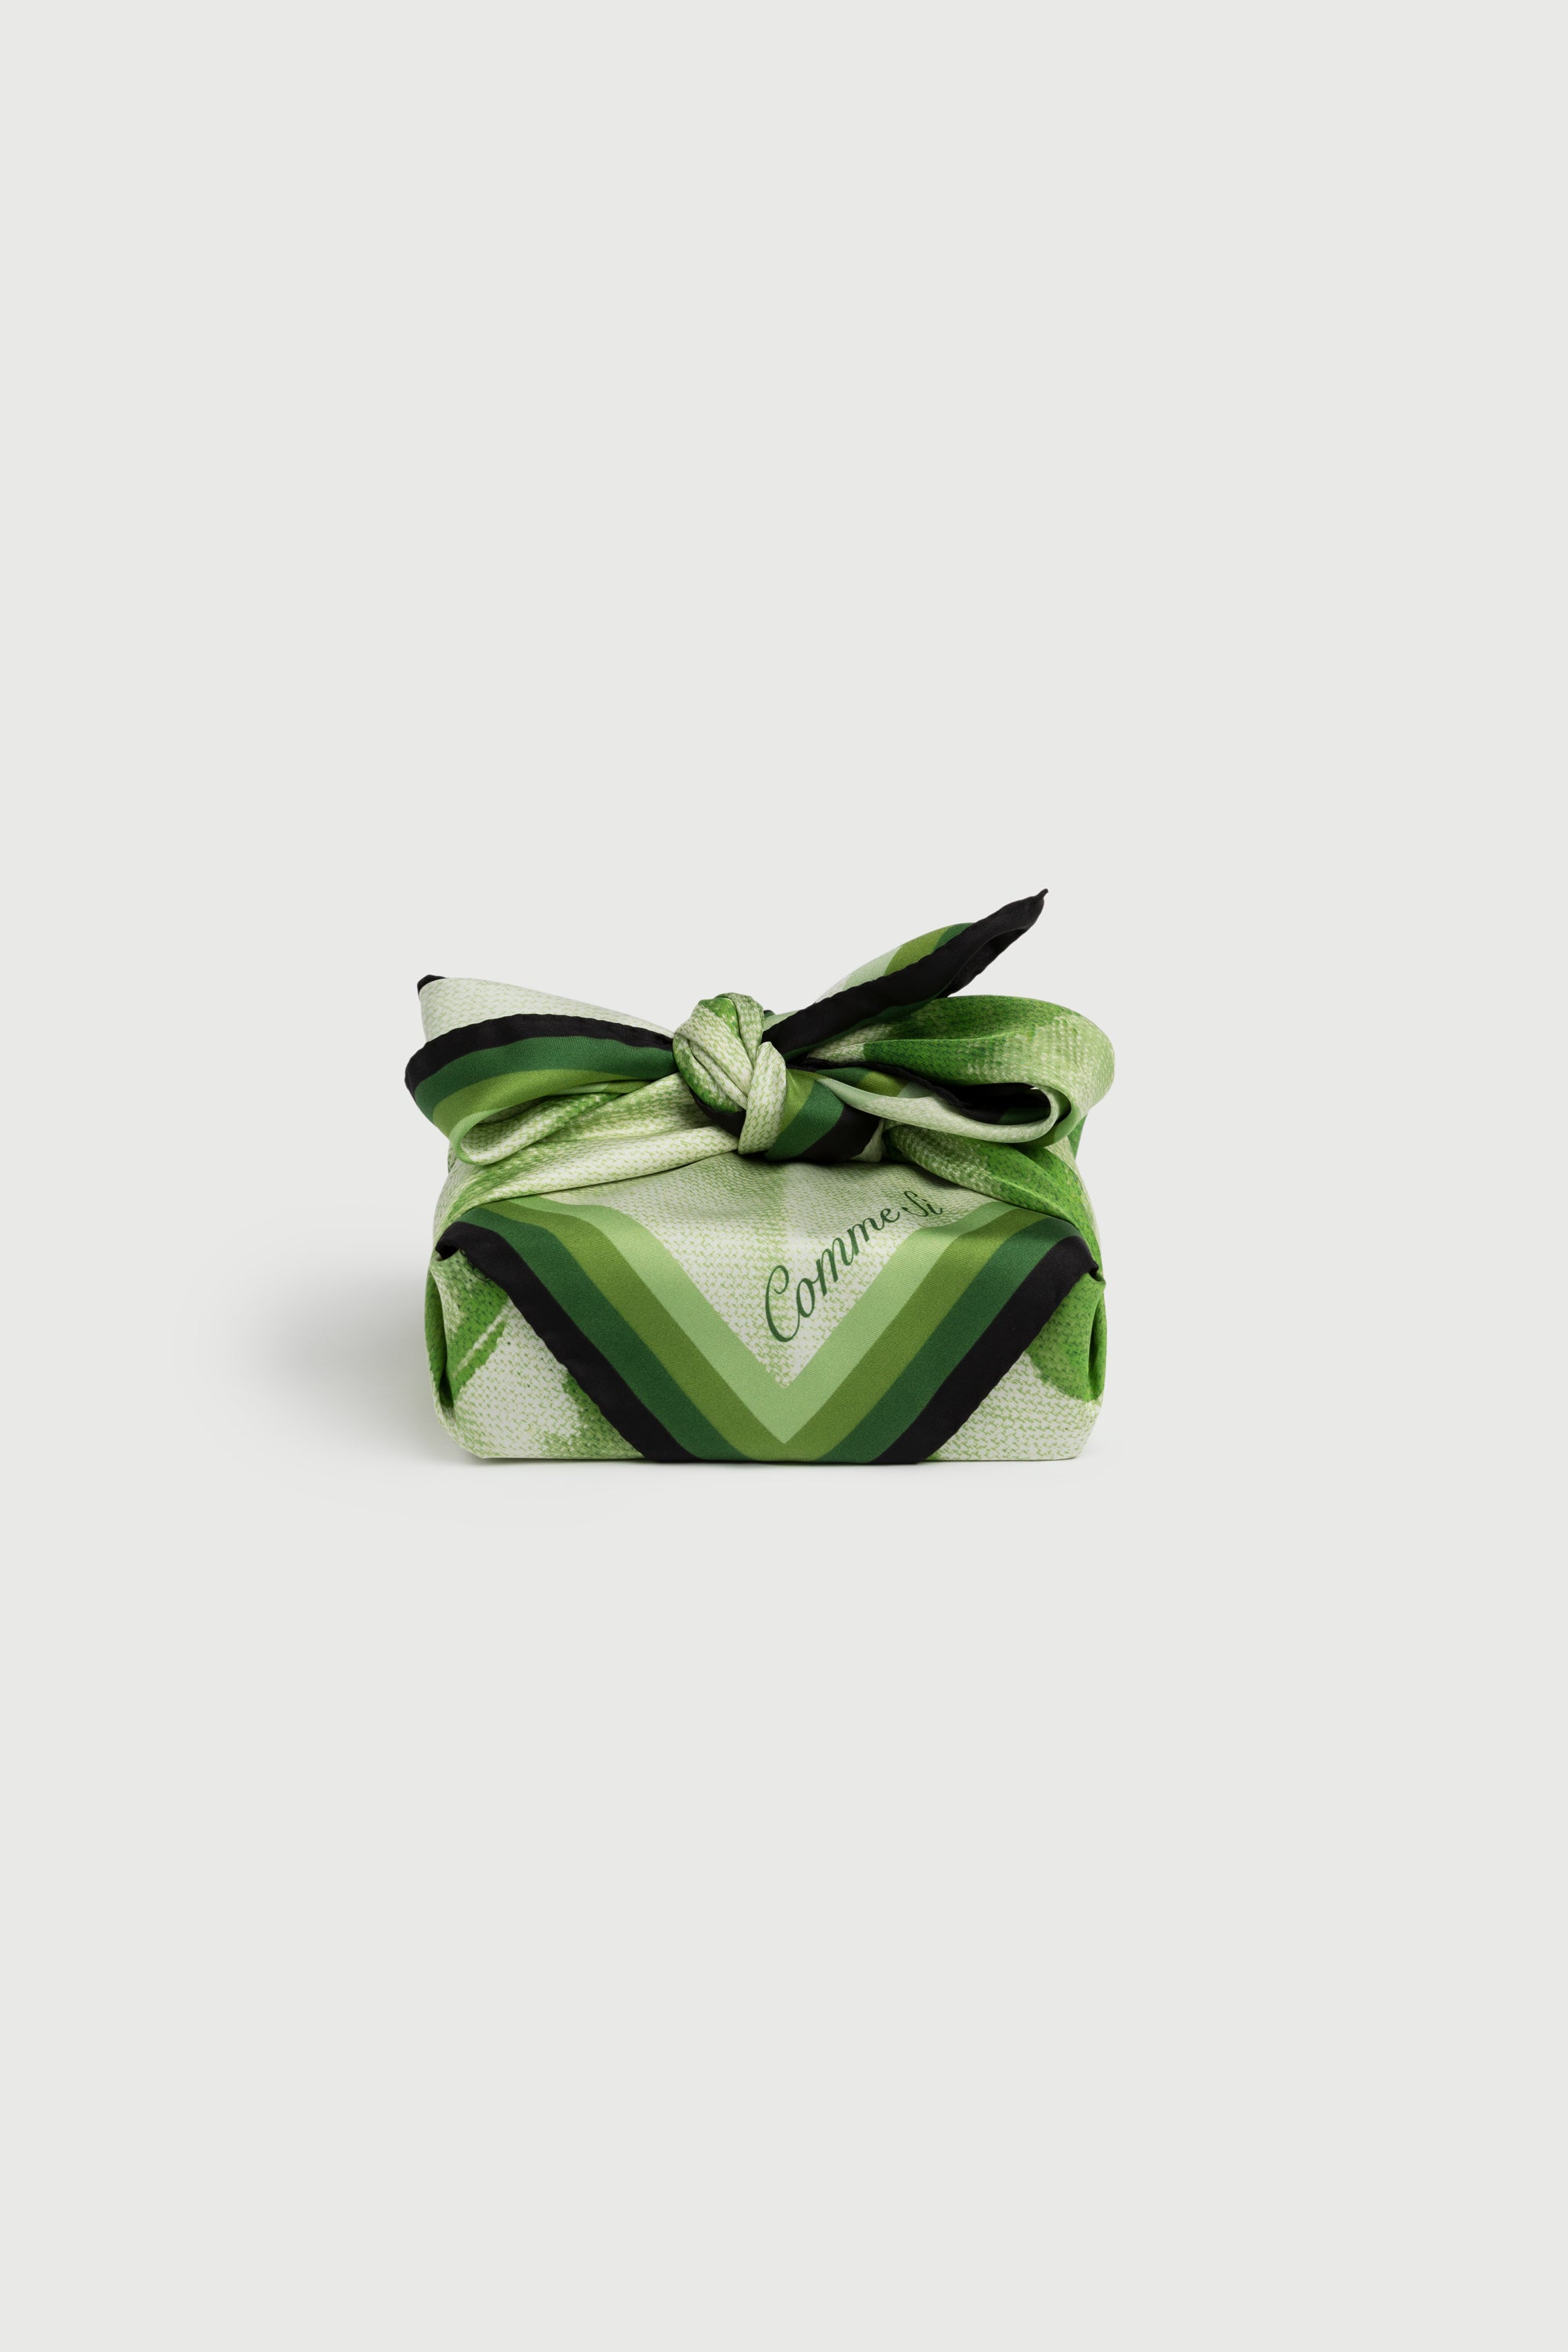 the silk scarf in green, tied as gift wrap, bojagi, comme si, origami pattern